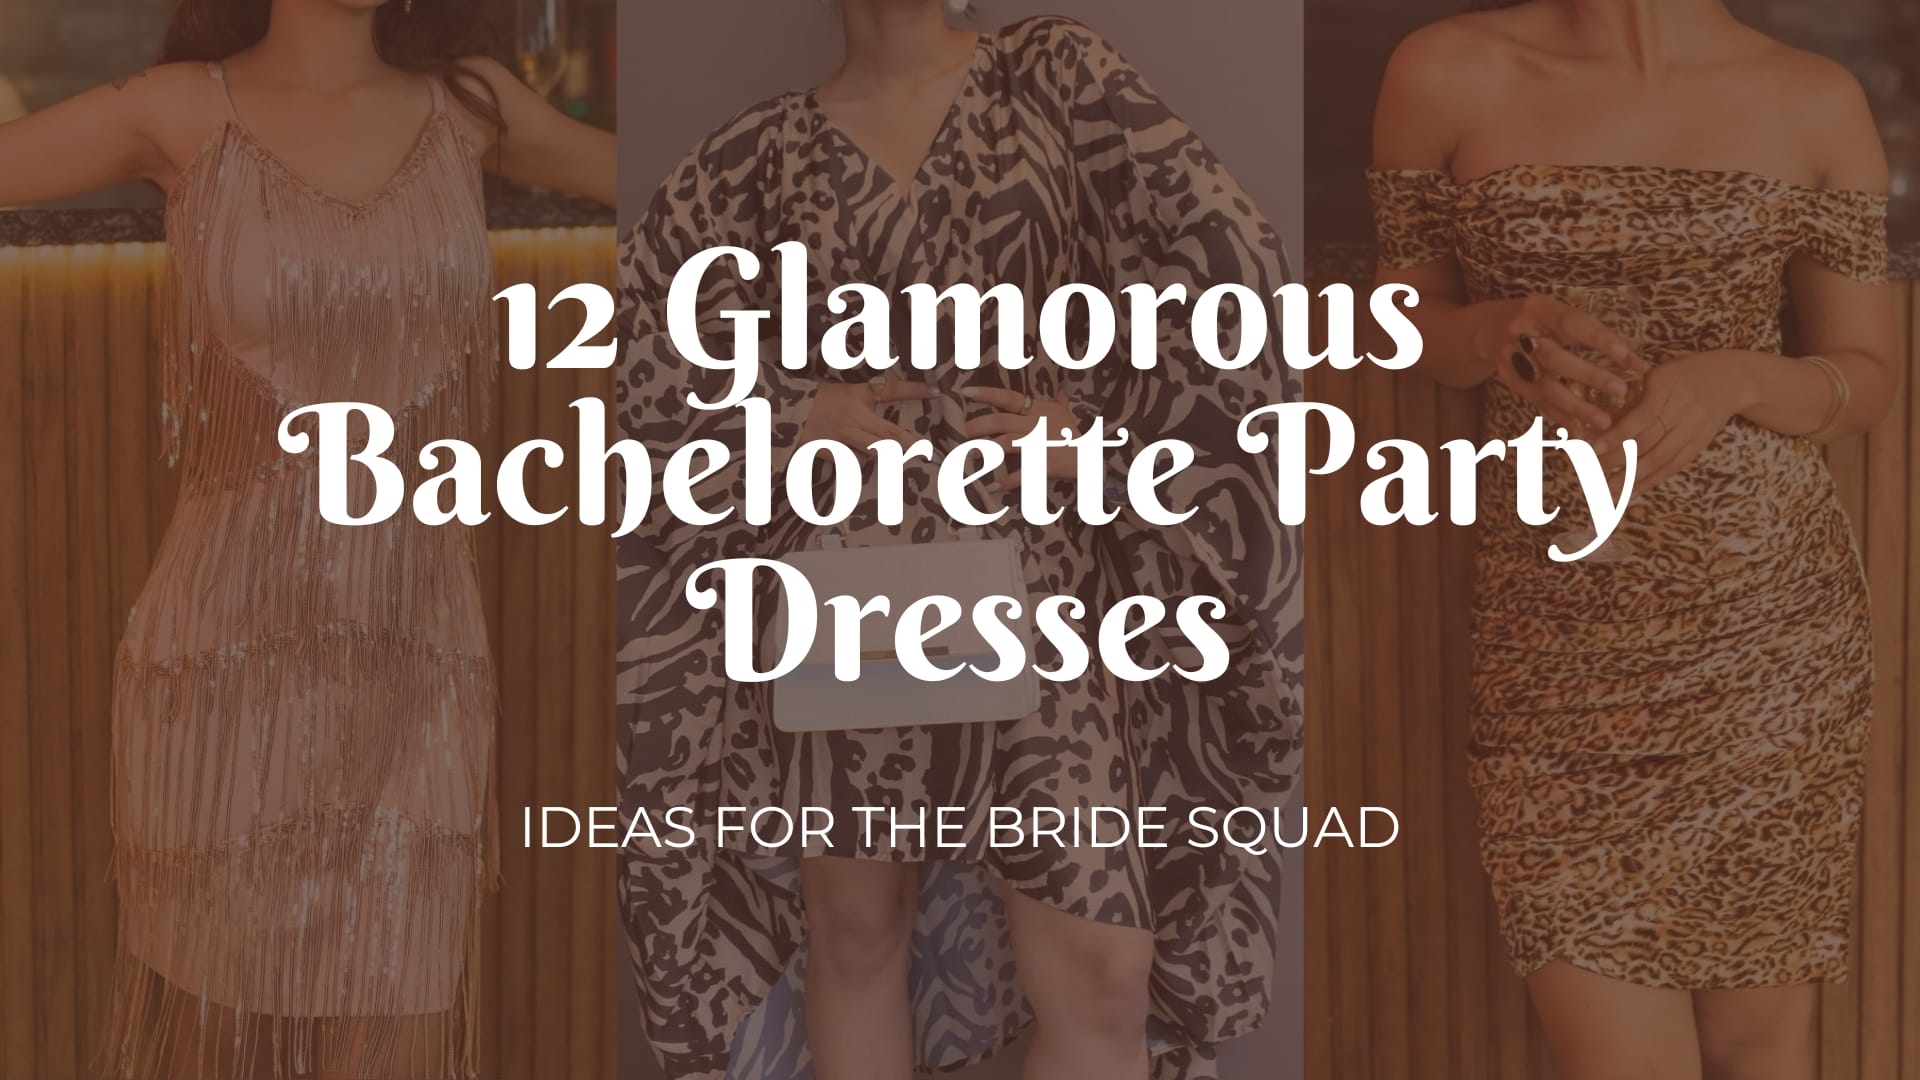 Bachelorette Party Movie Night for Every Bride